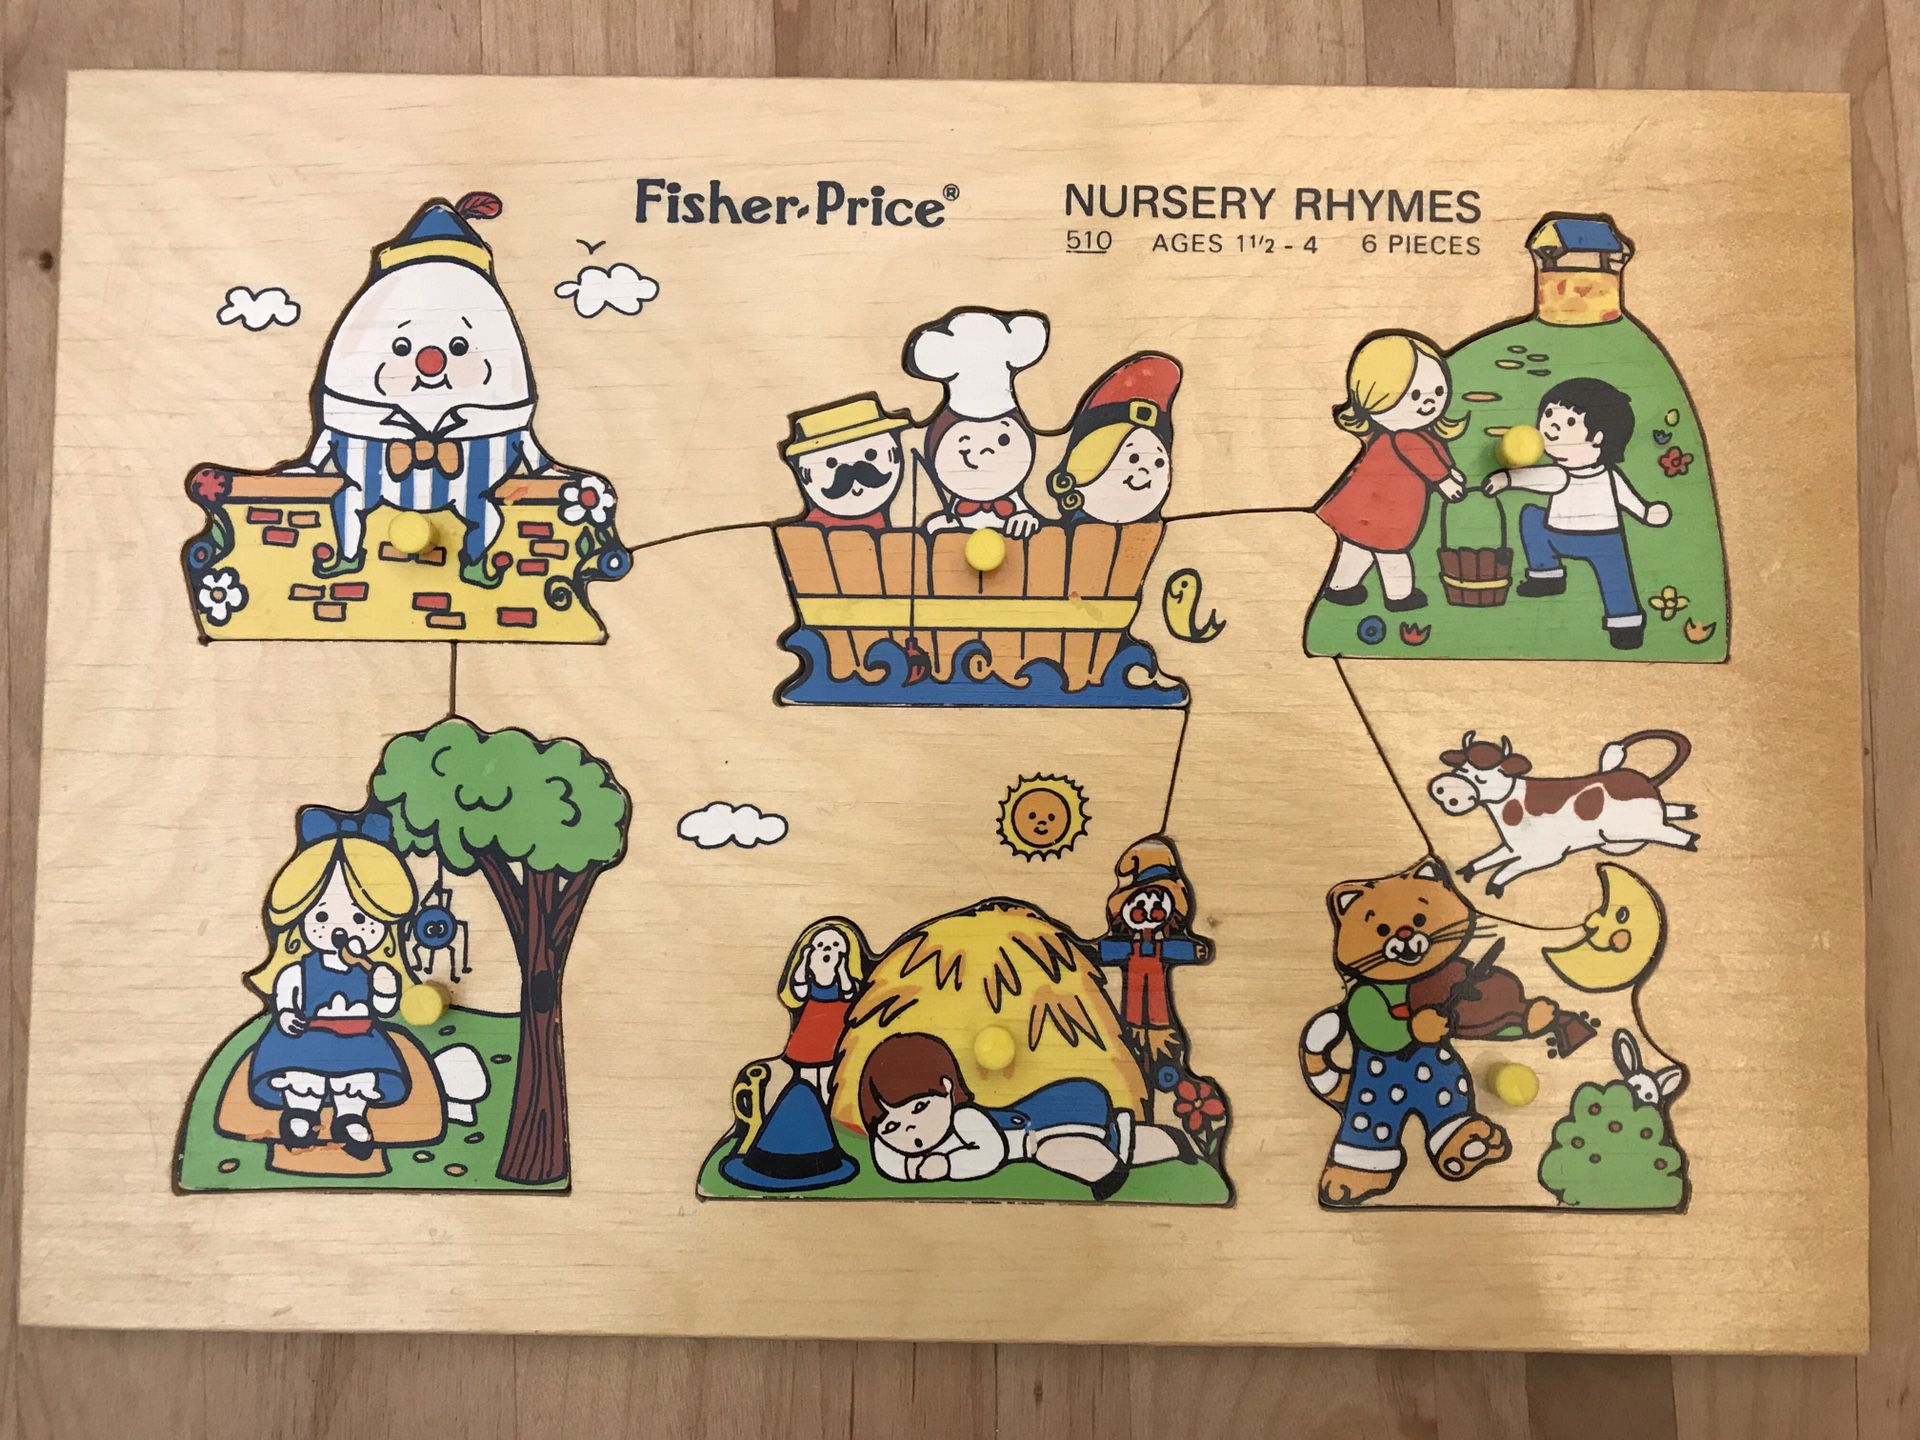 Vintage 1970’s Fisher Price Wood Puzzle NURSERY RHYMES 510 Ages 1.5 - 4, 6 Pieces